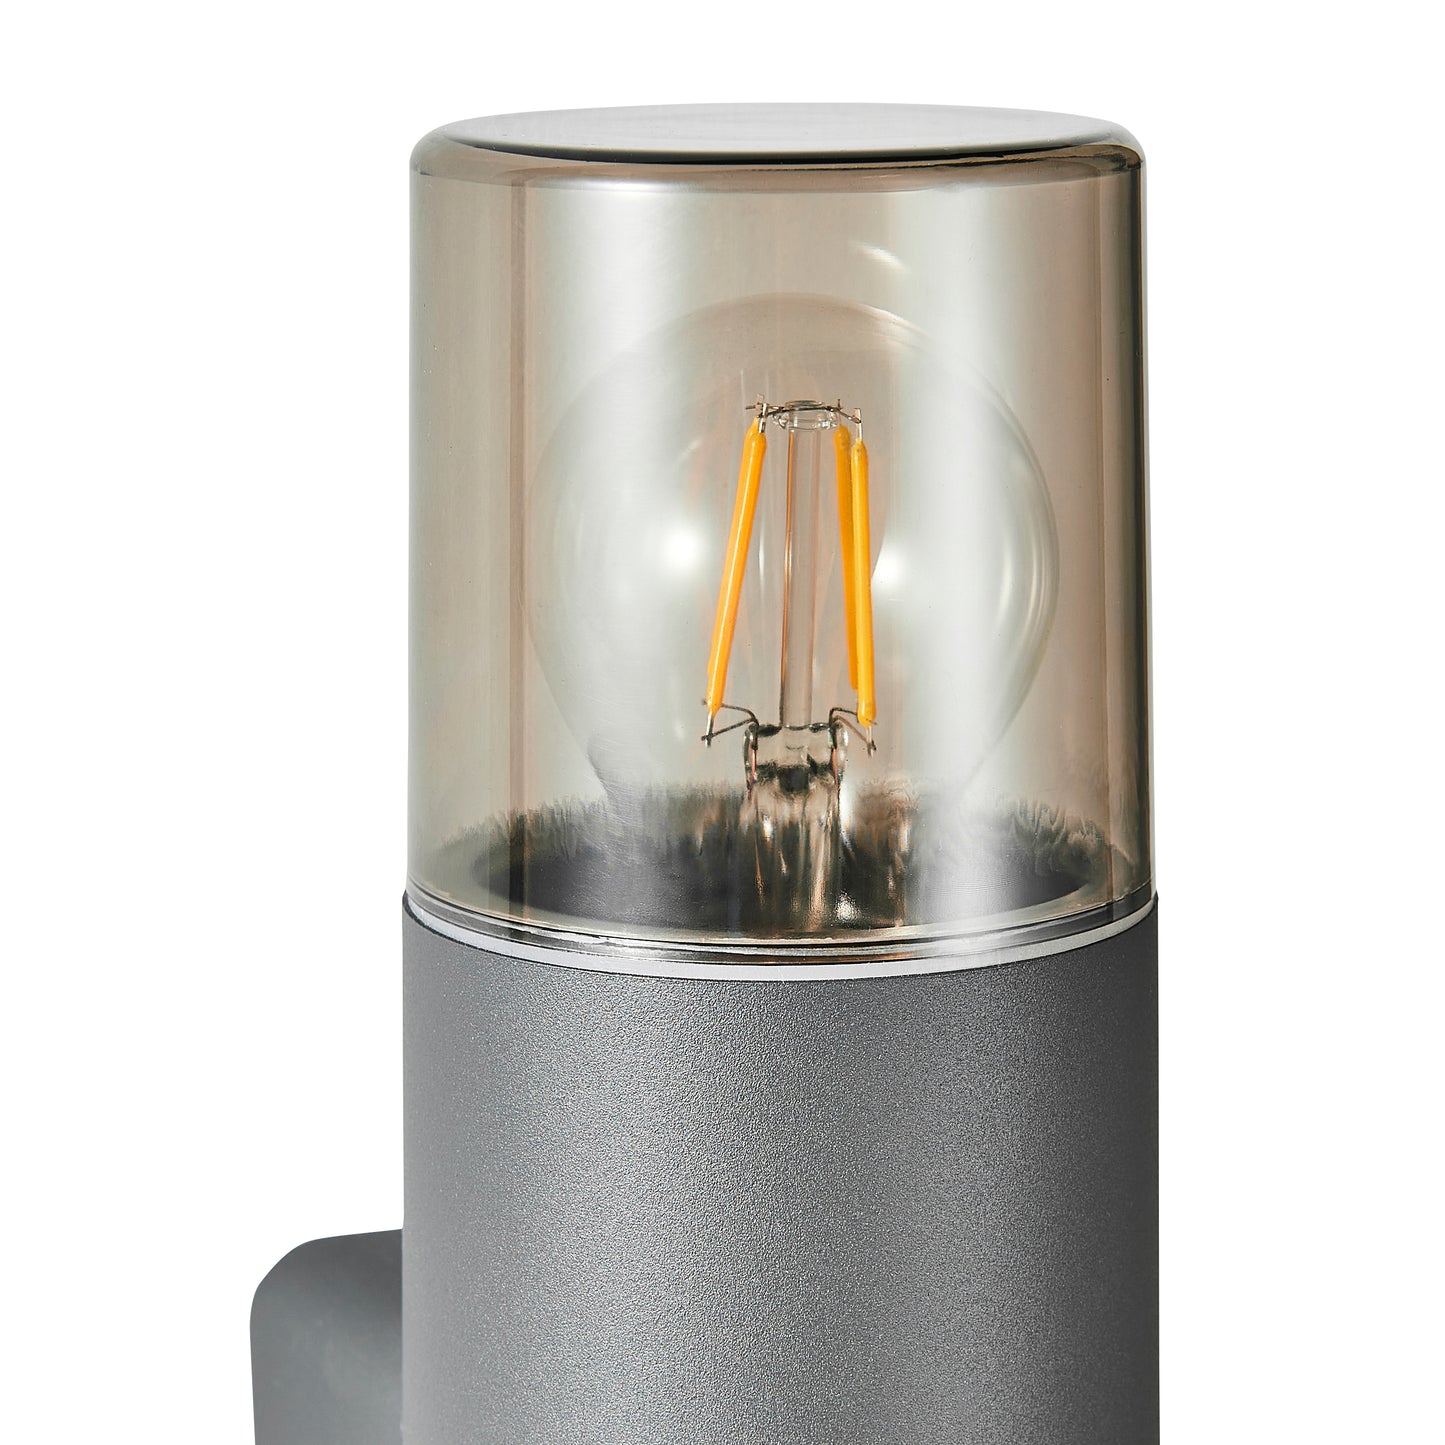 Our Cortez wall light looks great in modern settings. This wall light has a modern round tube design with anthracite finish aluminium body and 2 polycarbonate smoked diffusers. This wall light is perfect for any outdoor space requiring light and security such as gardens, driveways, doorways workspaces, pubs and hotels.